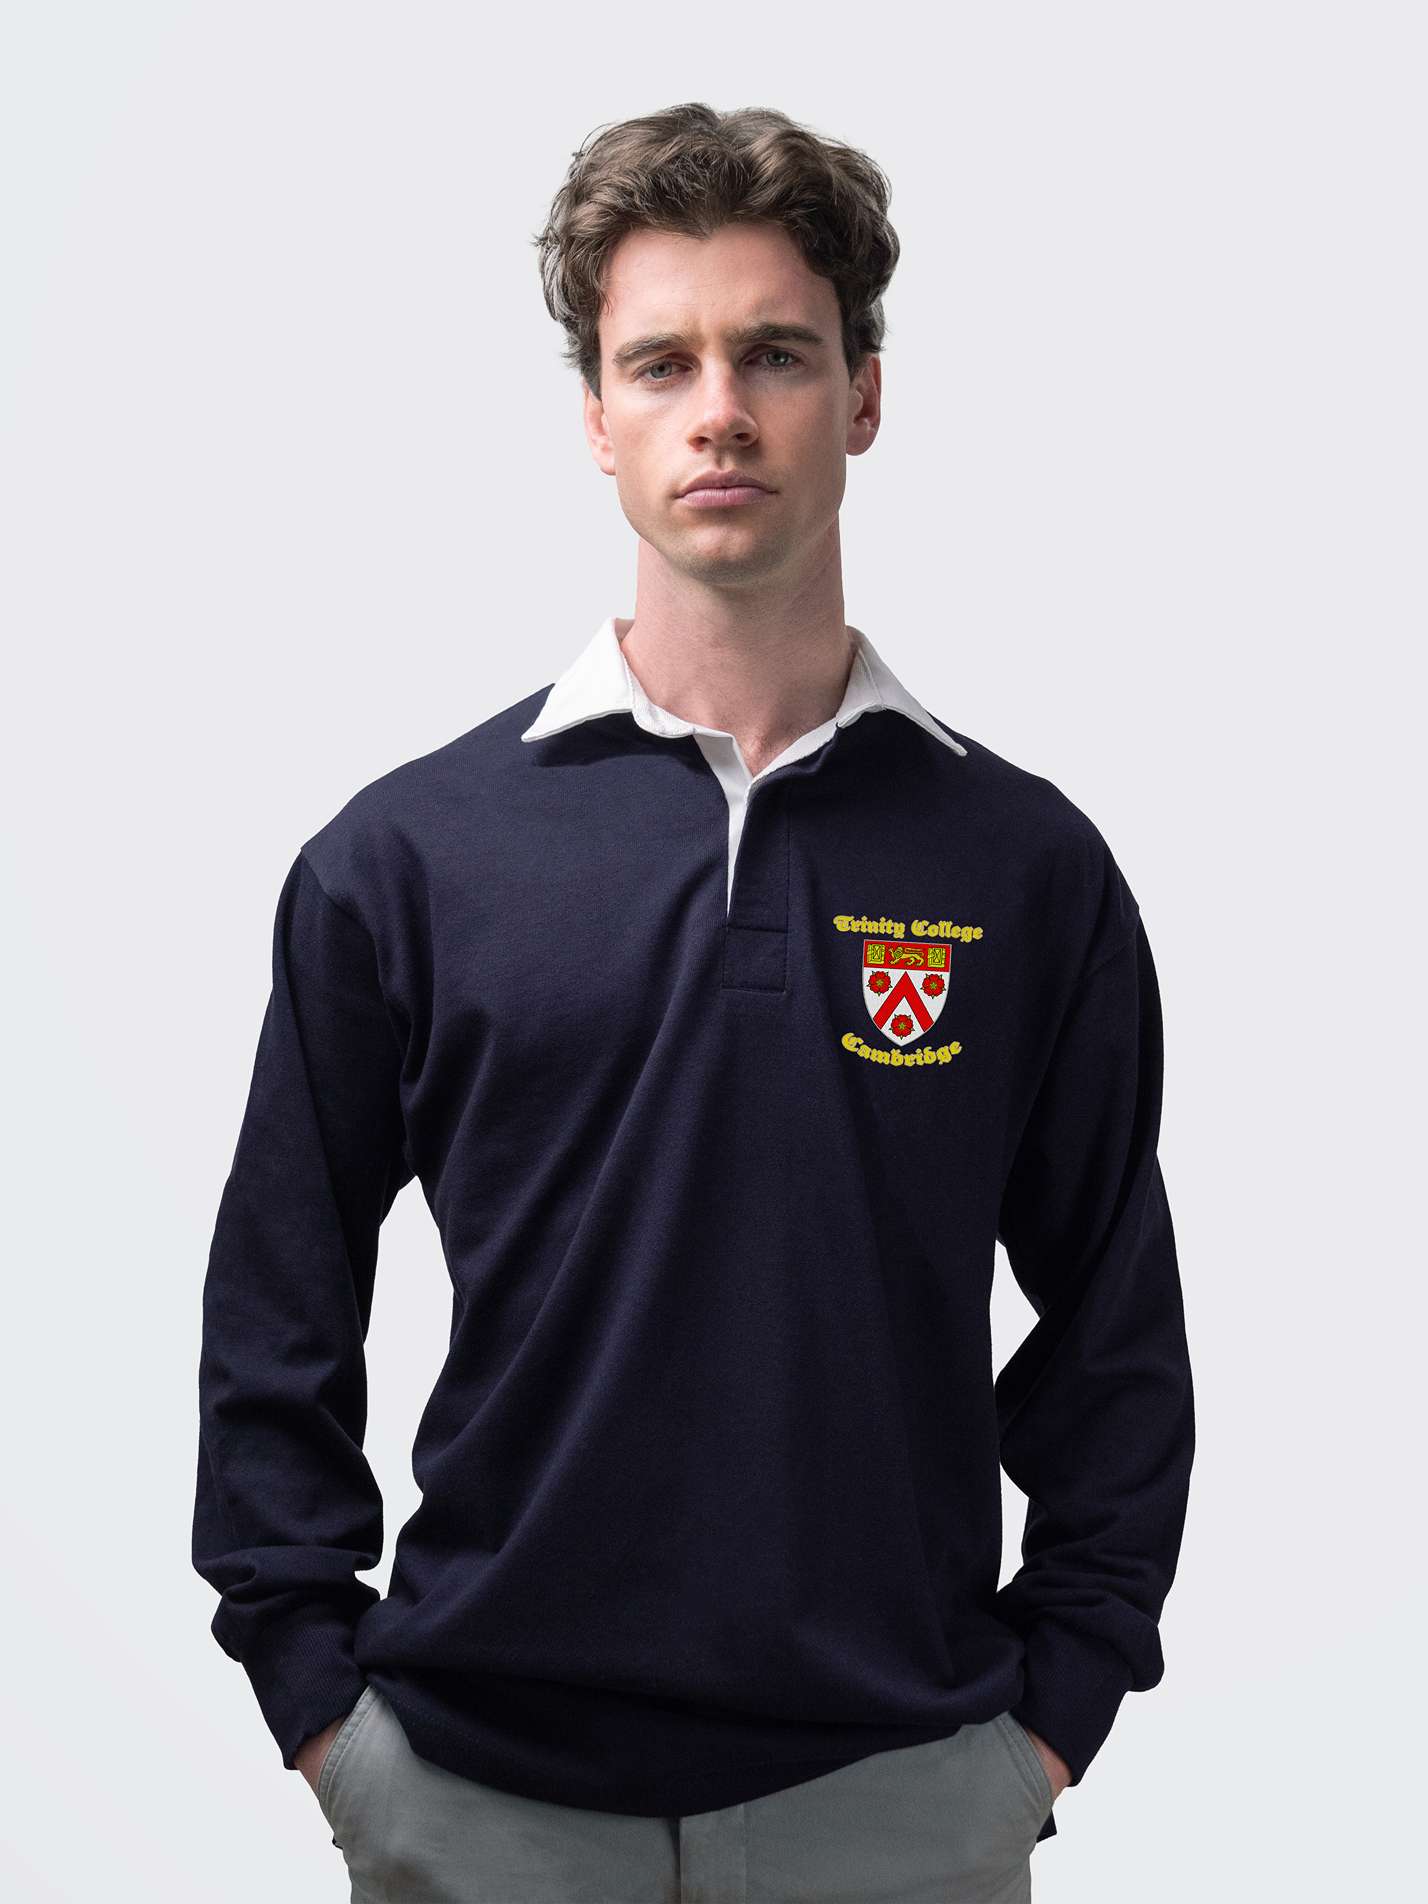 Trinity student wearing an embroidered mens rugby shirt in navy